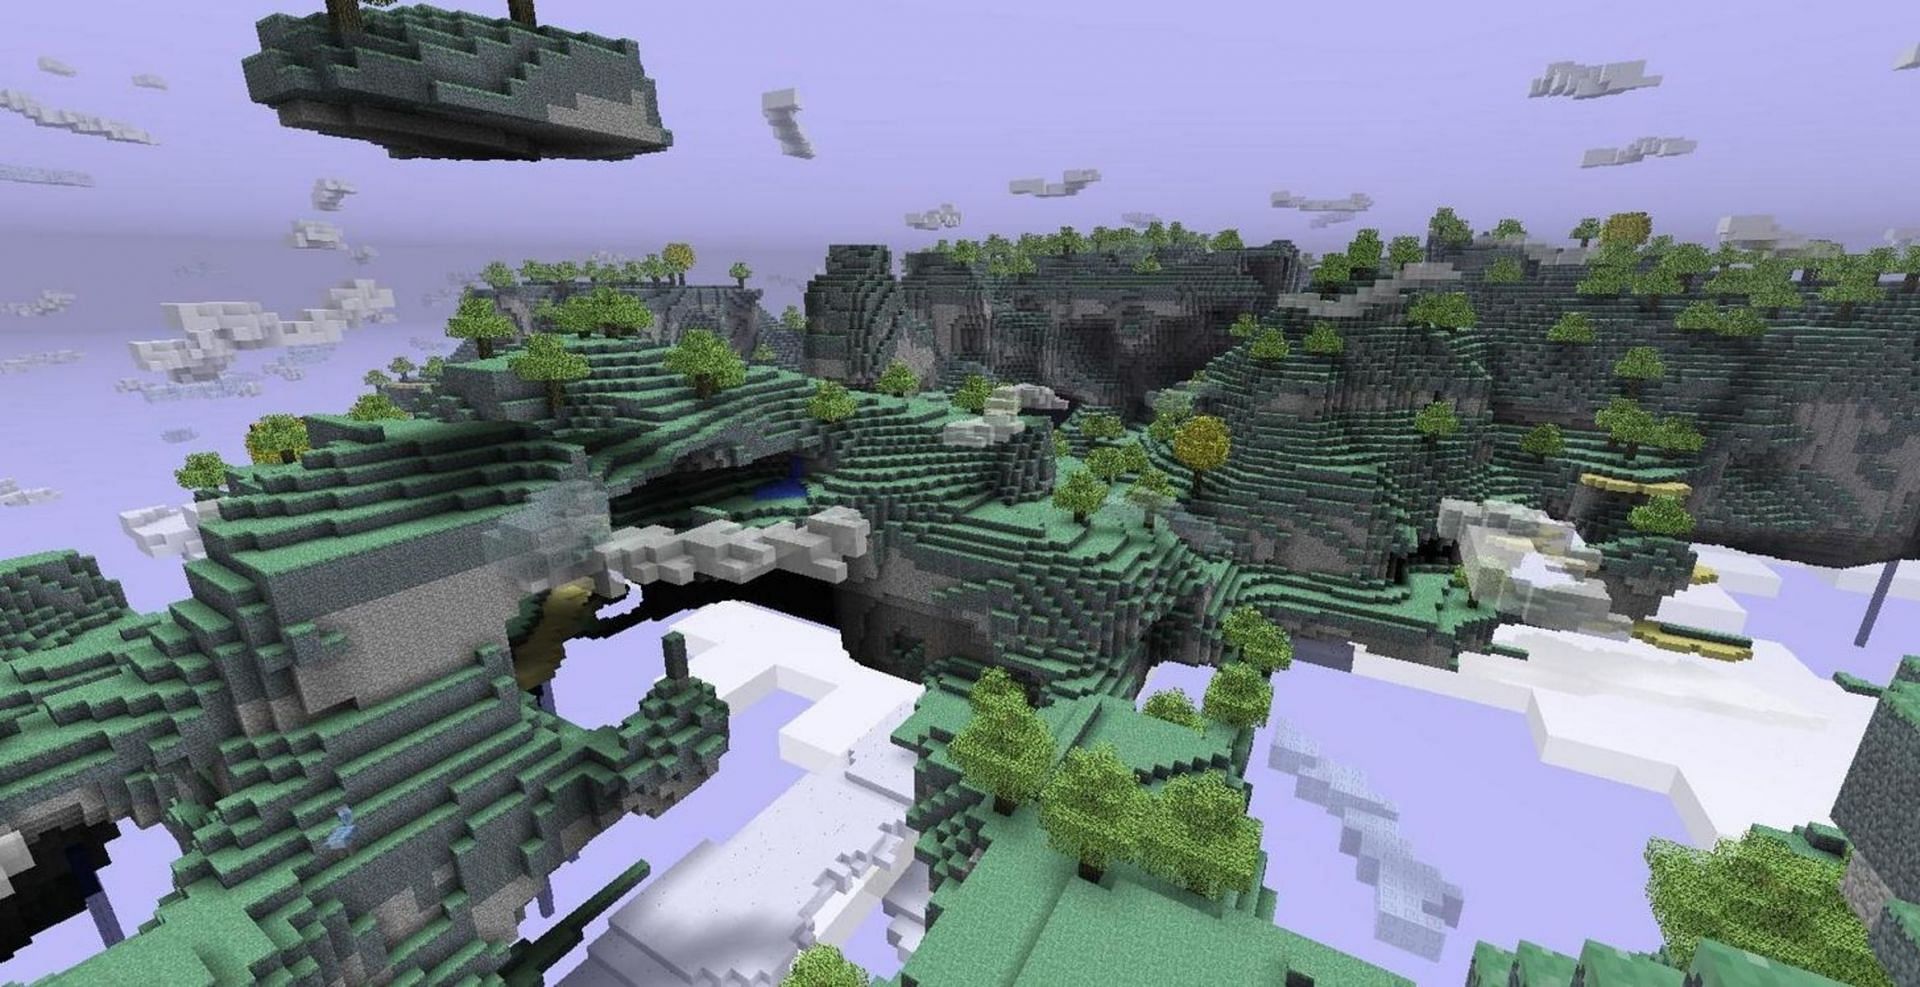 Quest modpacks can introduce new regions and realms to Minecraft (Image via Mojang)